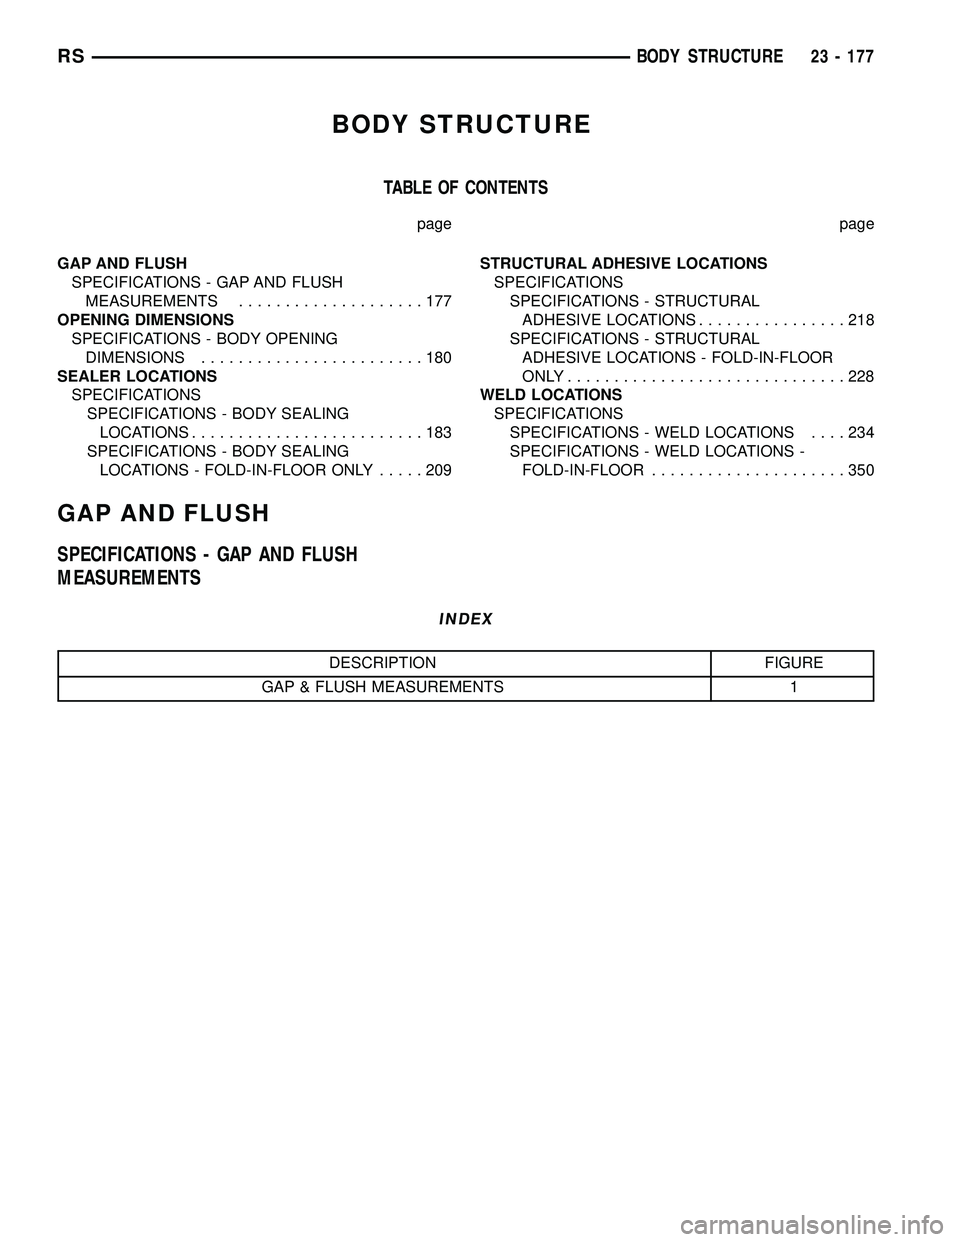 CHRYSLER VOYAGER 2005  Service Manual BODY STRUCTURE
TABLE OF CONTENTS
page page
GAP AND FLUSH
SPECIFICATIONS - GAP AND FLUSH
MEASUREMENTS....................177
OPENING DIMENSIONS
SPECIFICATIONS - BODY OPENING
DIMENSIONS.................